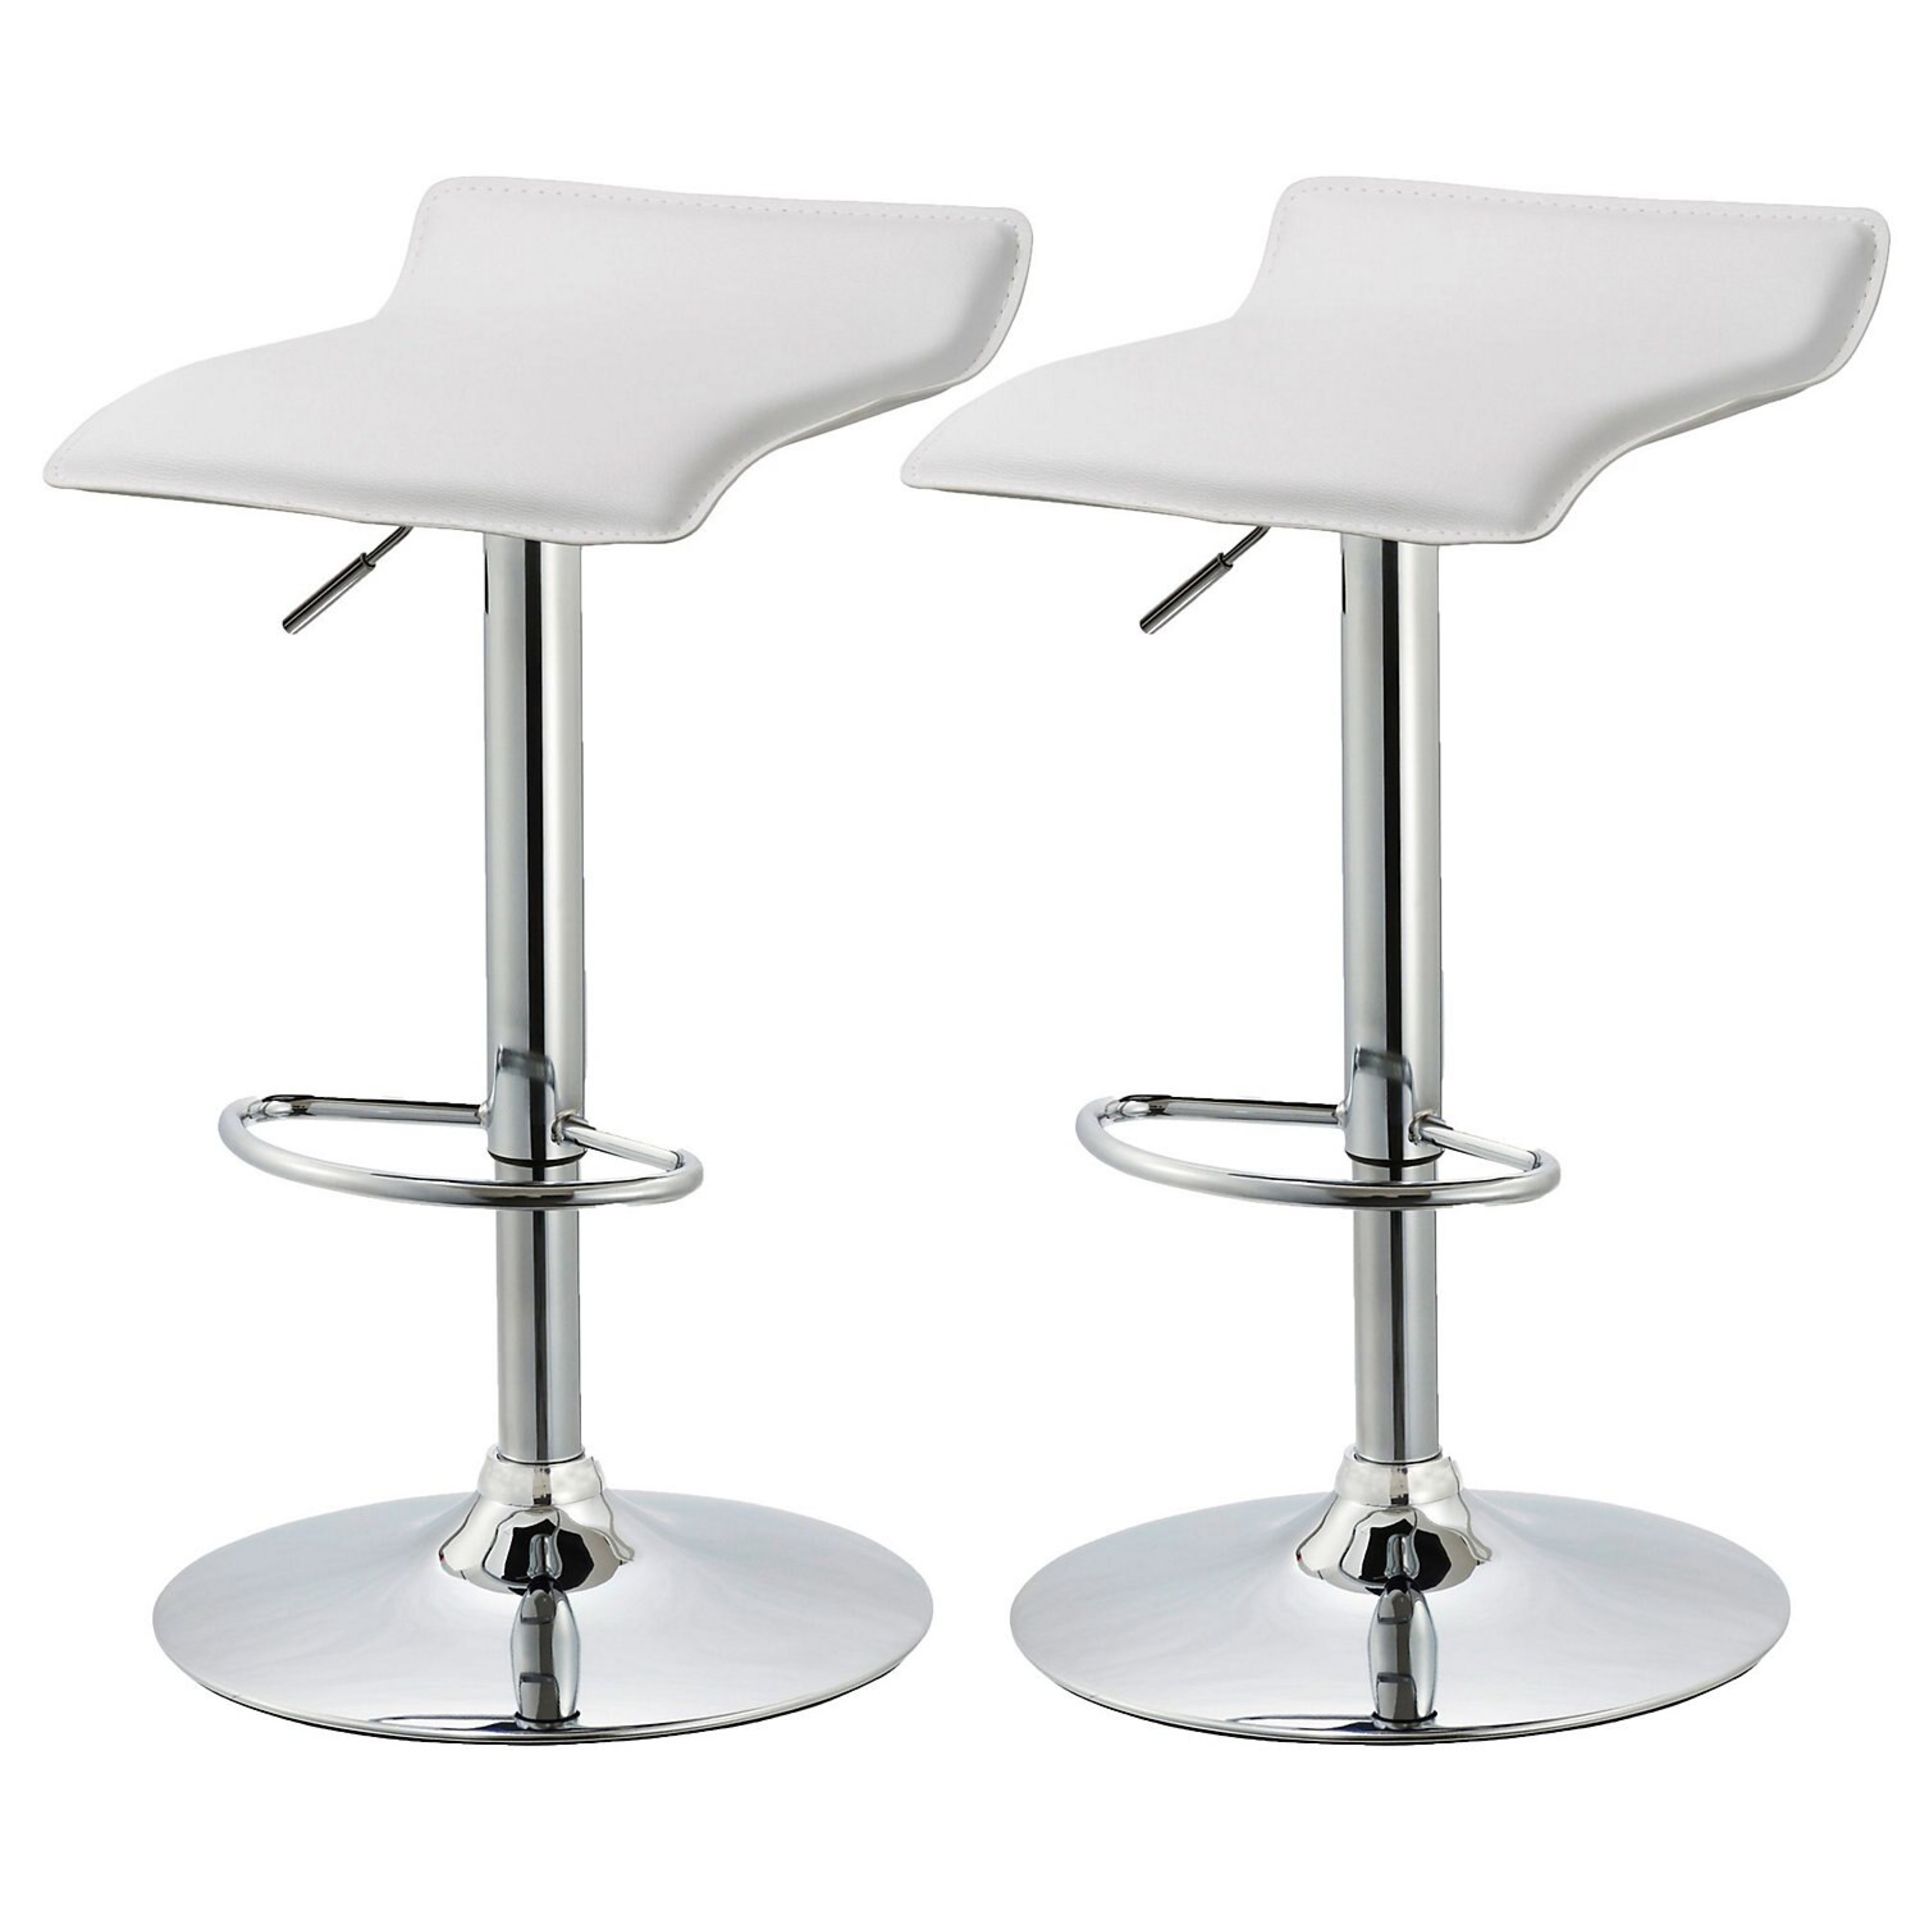 NEW Dante White & Chrome effect Bar stool (H)850mm (W)415mm. Pack of 1. Bar Stools are a great... - Image 2 of 2